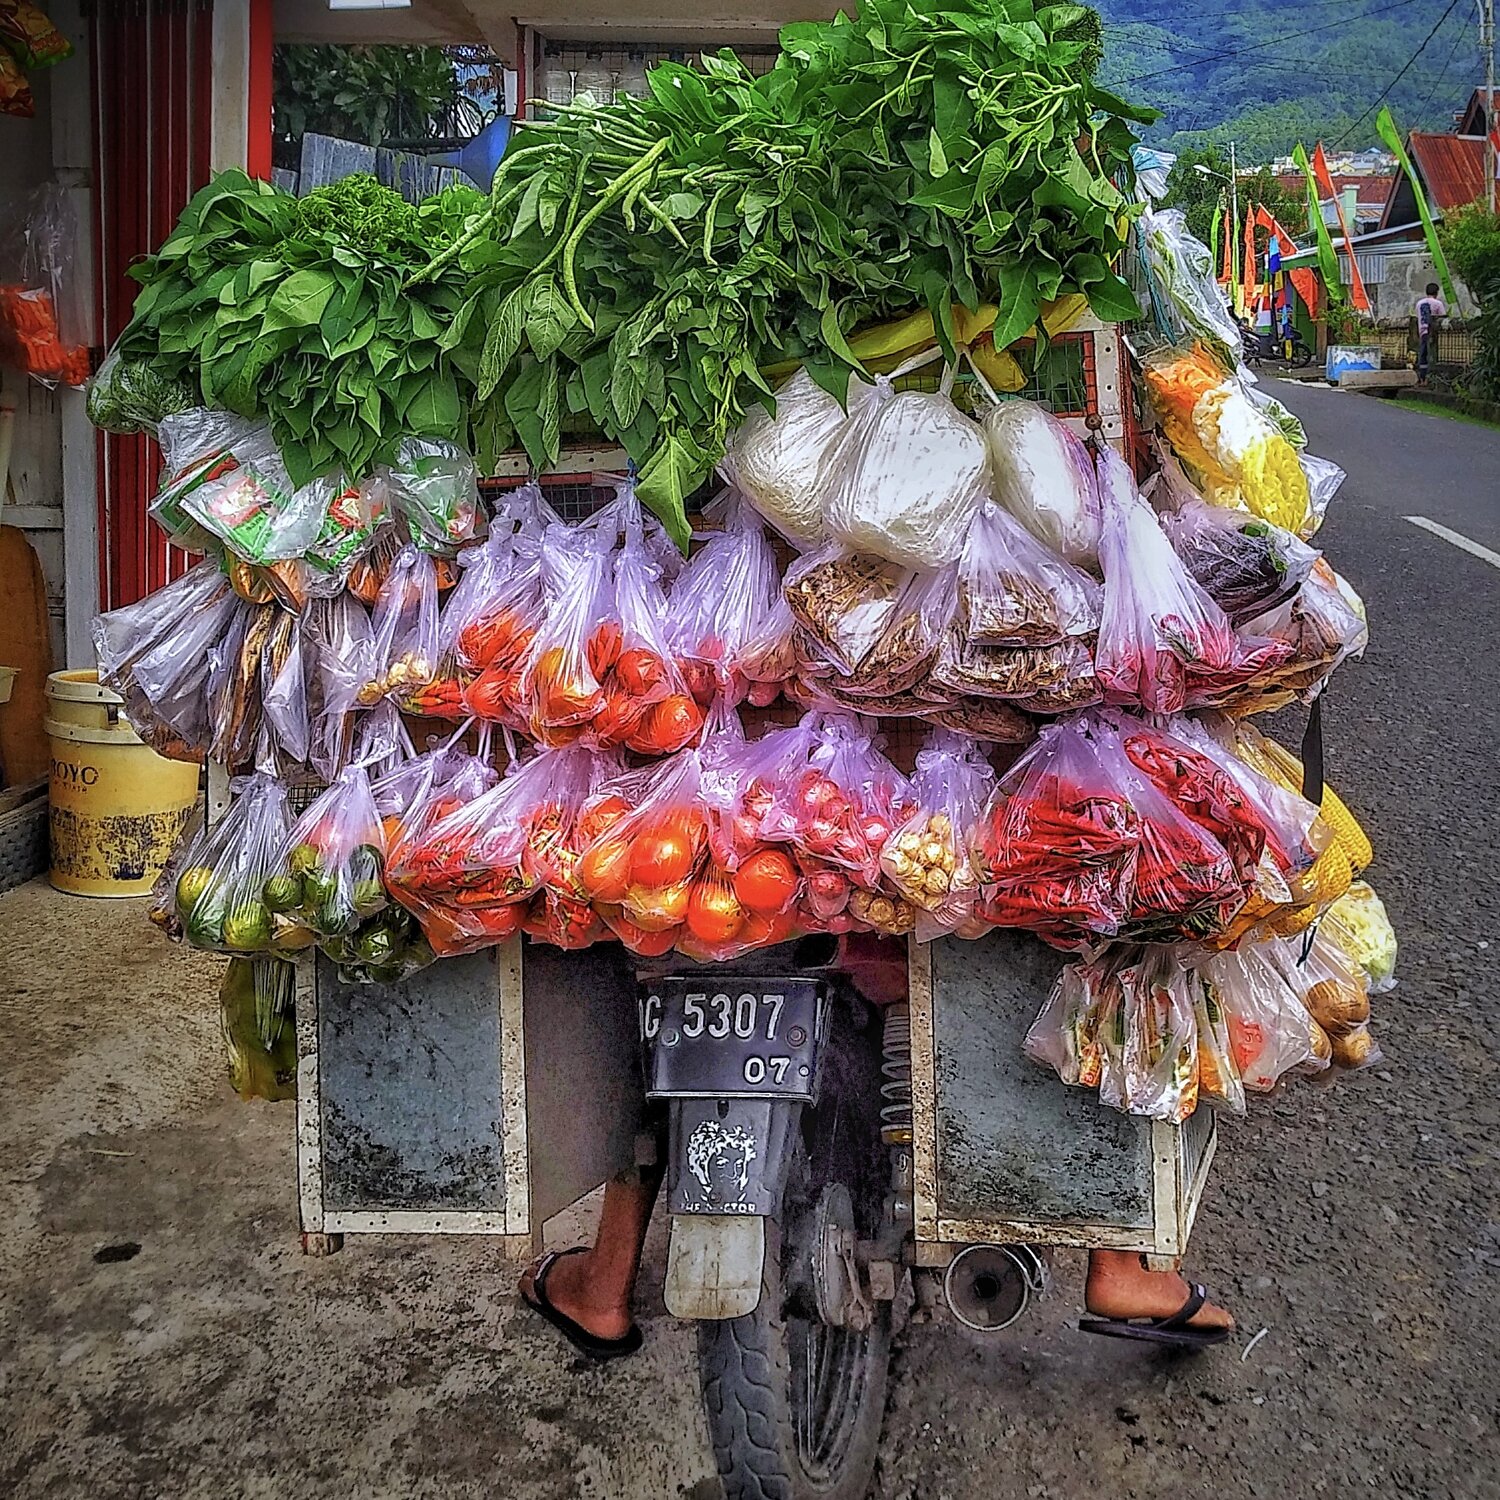 Moluccas - Spice Islands: Fully loaded motorbike with spices